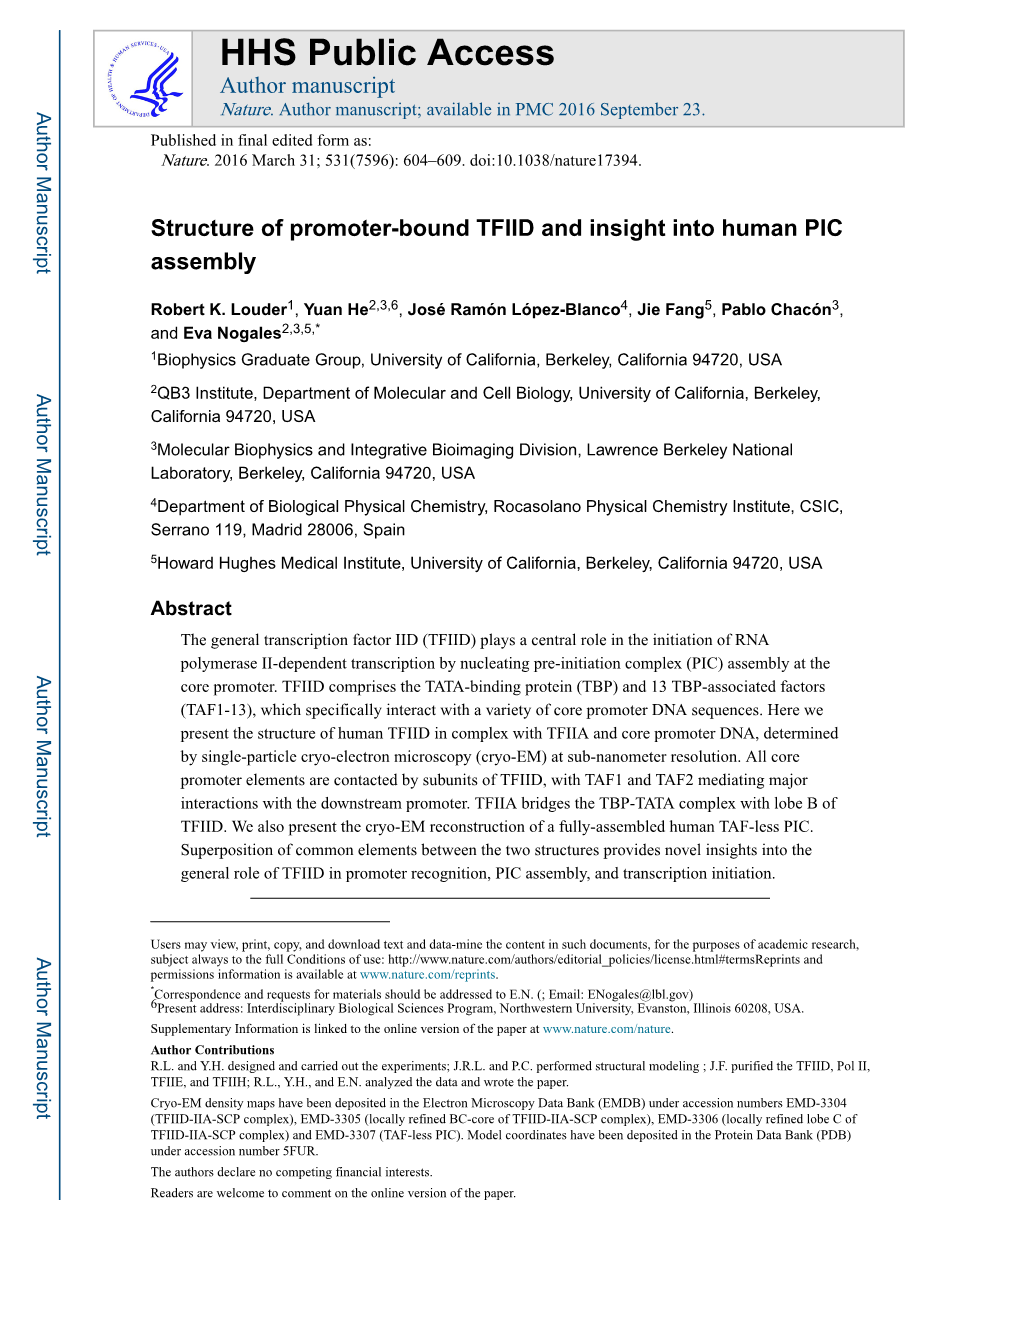 Structure of Promoter-Bound TFIID and Insight Into Human PIC Assembly